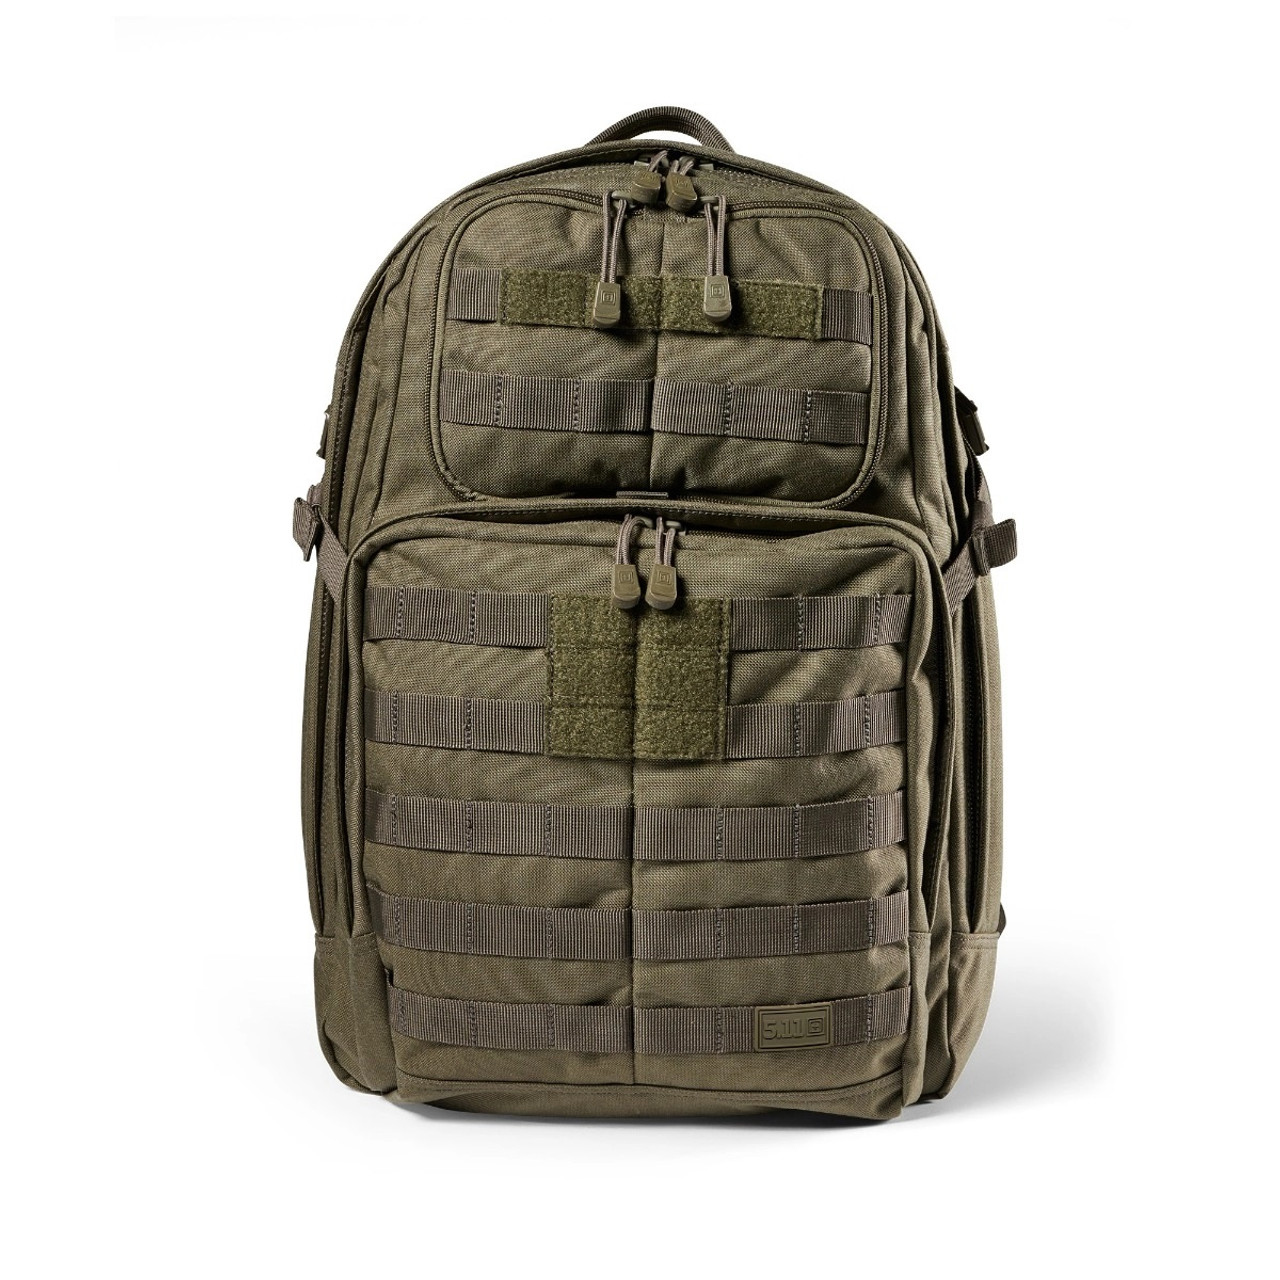  5.11 Tactical Backpack, Rush 24 2.0, Military Molle